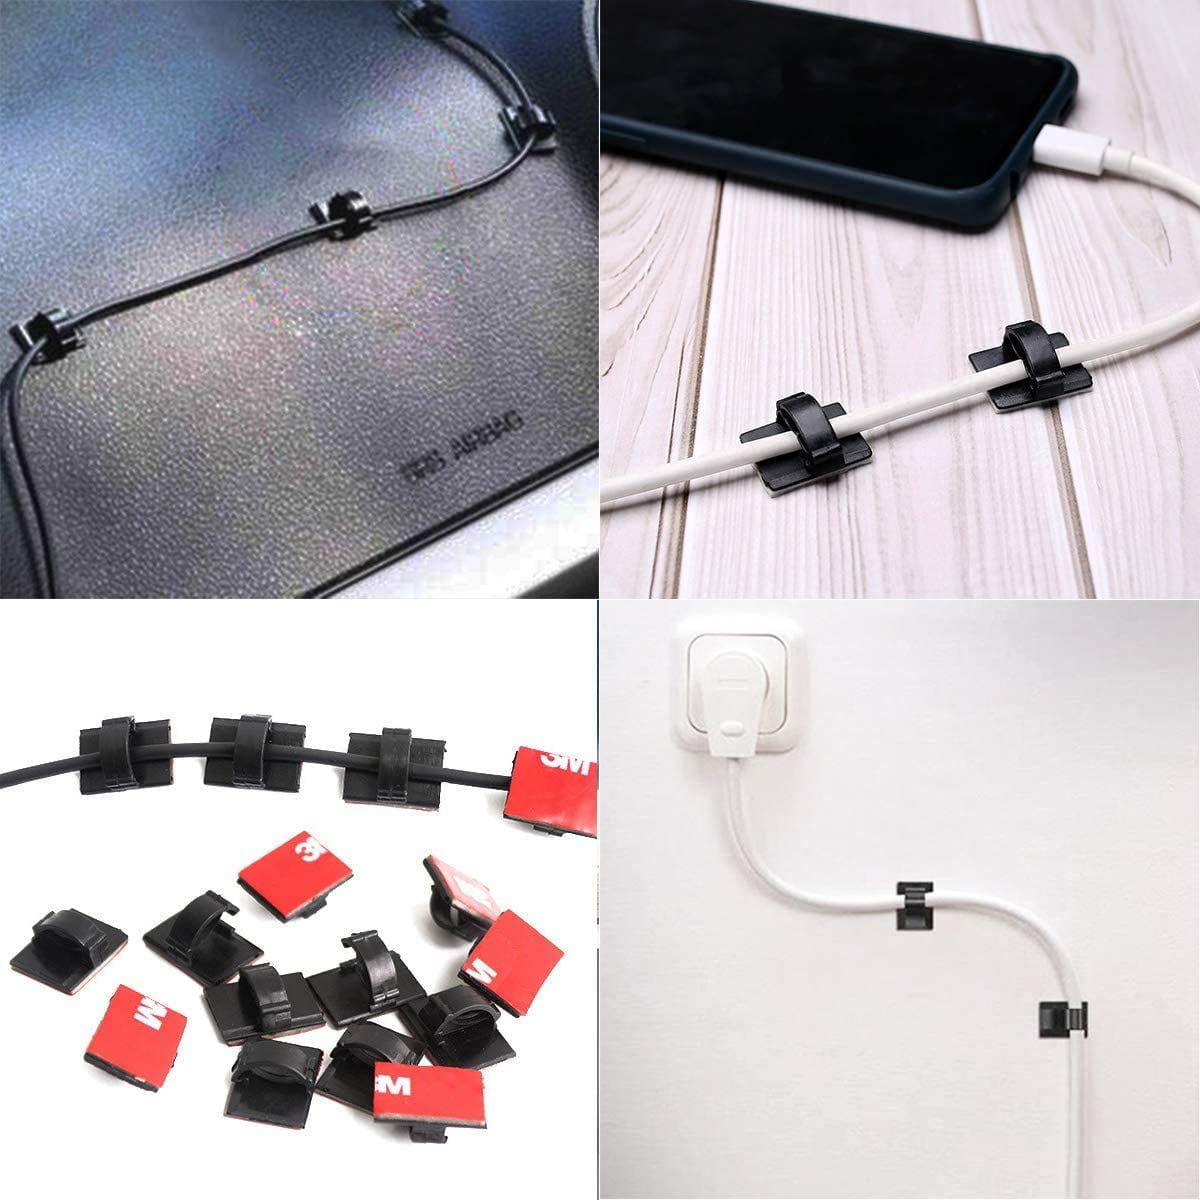 100pcs Self Adhesive Adjustable Wire Fixing Clamp Cable Tie Mount Straps Black 